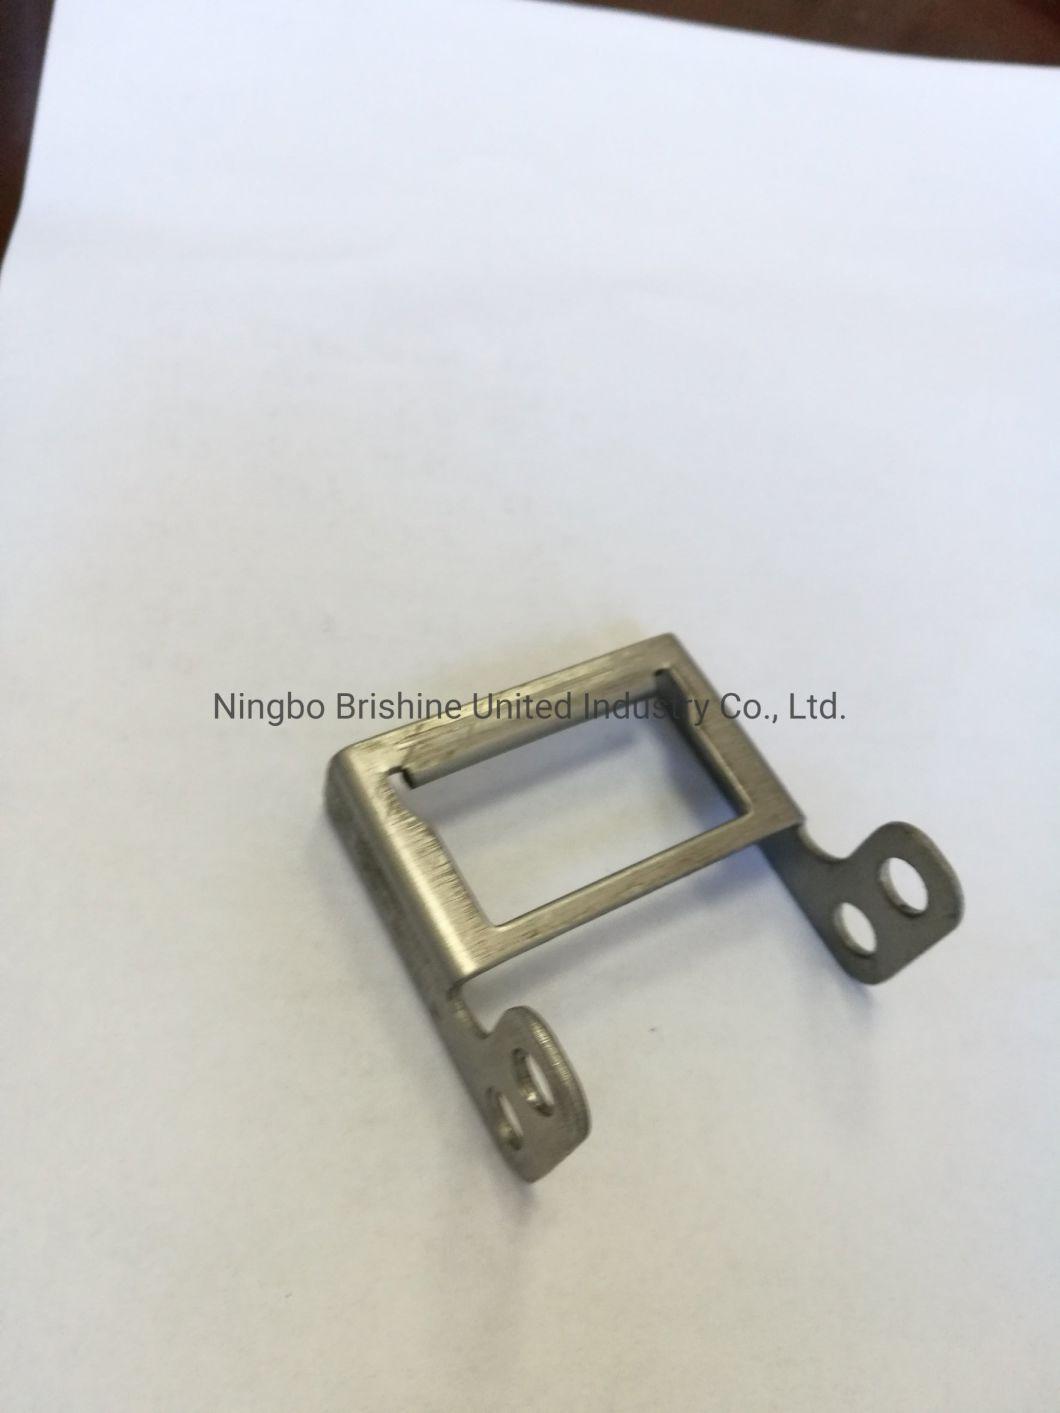 Alloy Aluminum Die Casting Parts for Auto Industry